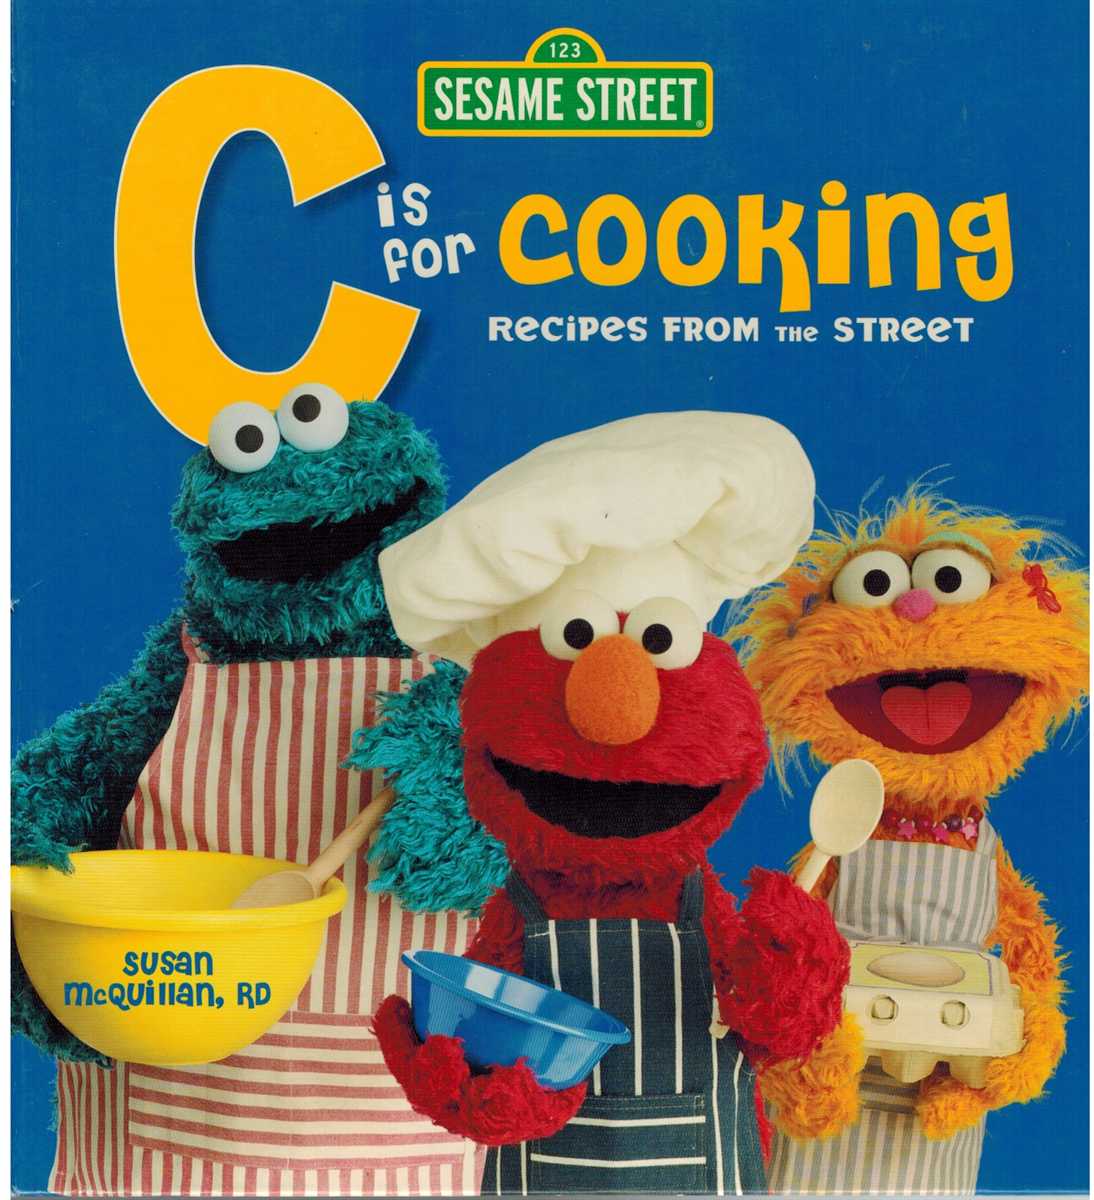 McQuillan, Susan & Sesame Workshop - C IS FOR COOKING Recipes from the Street